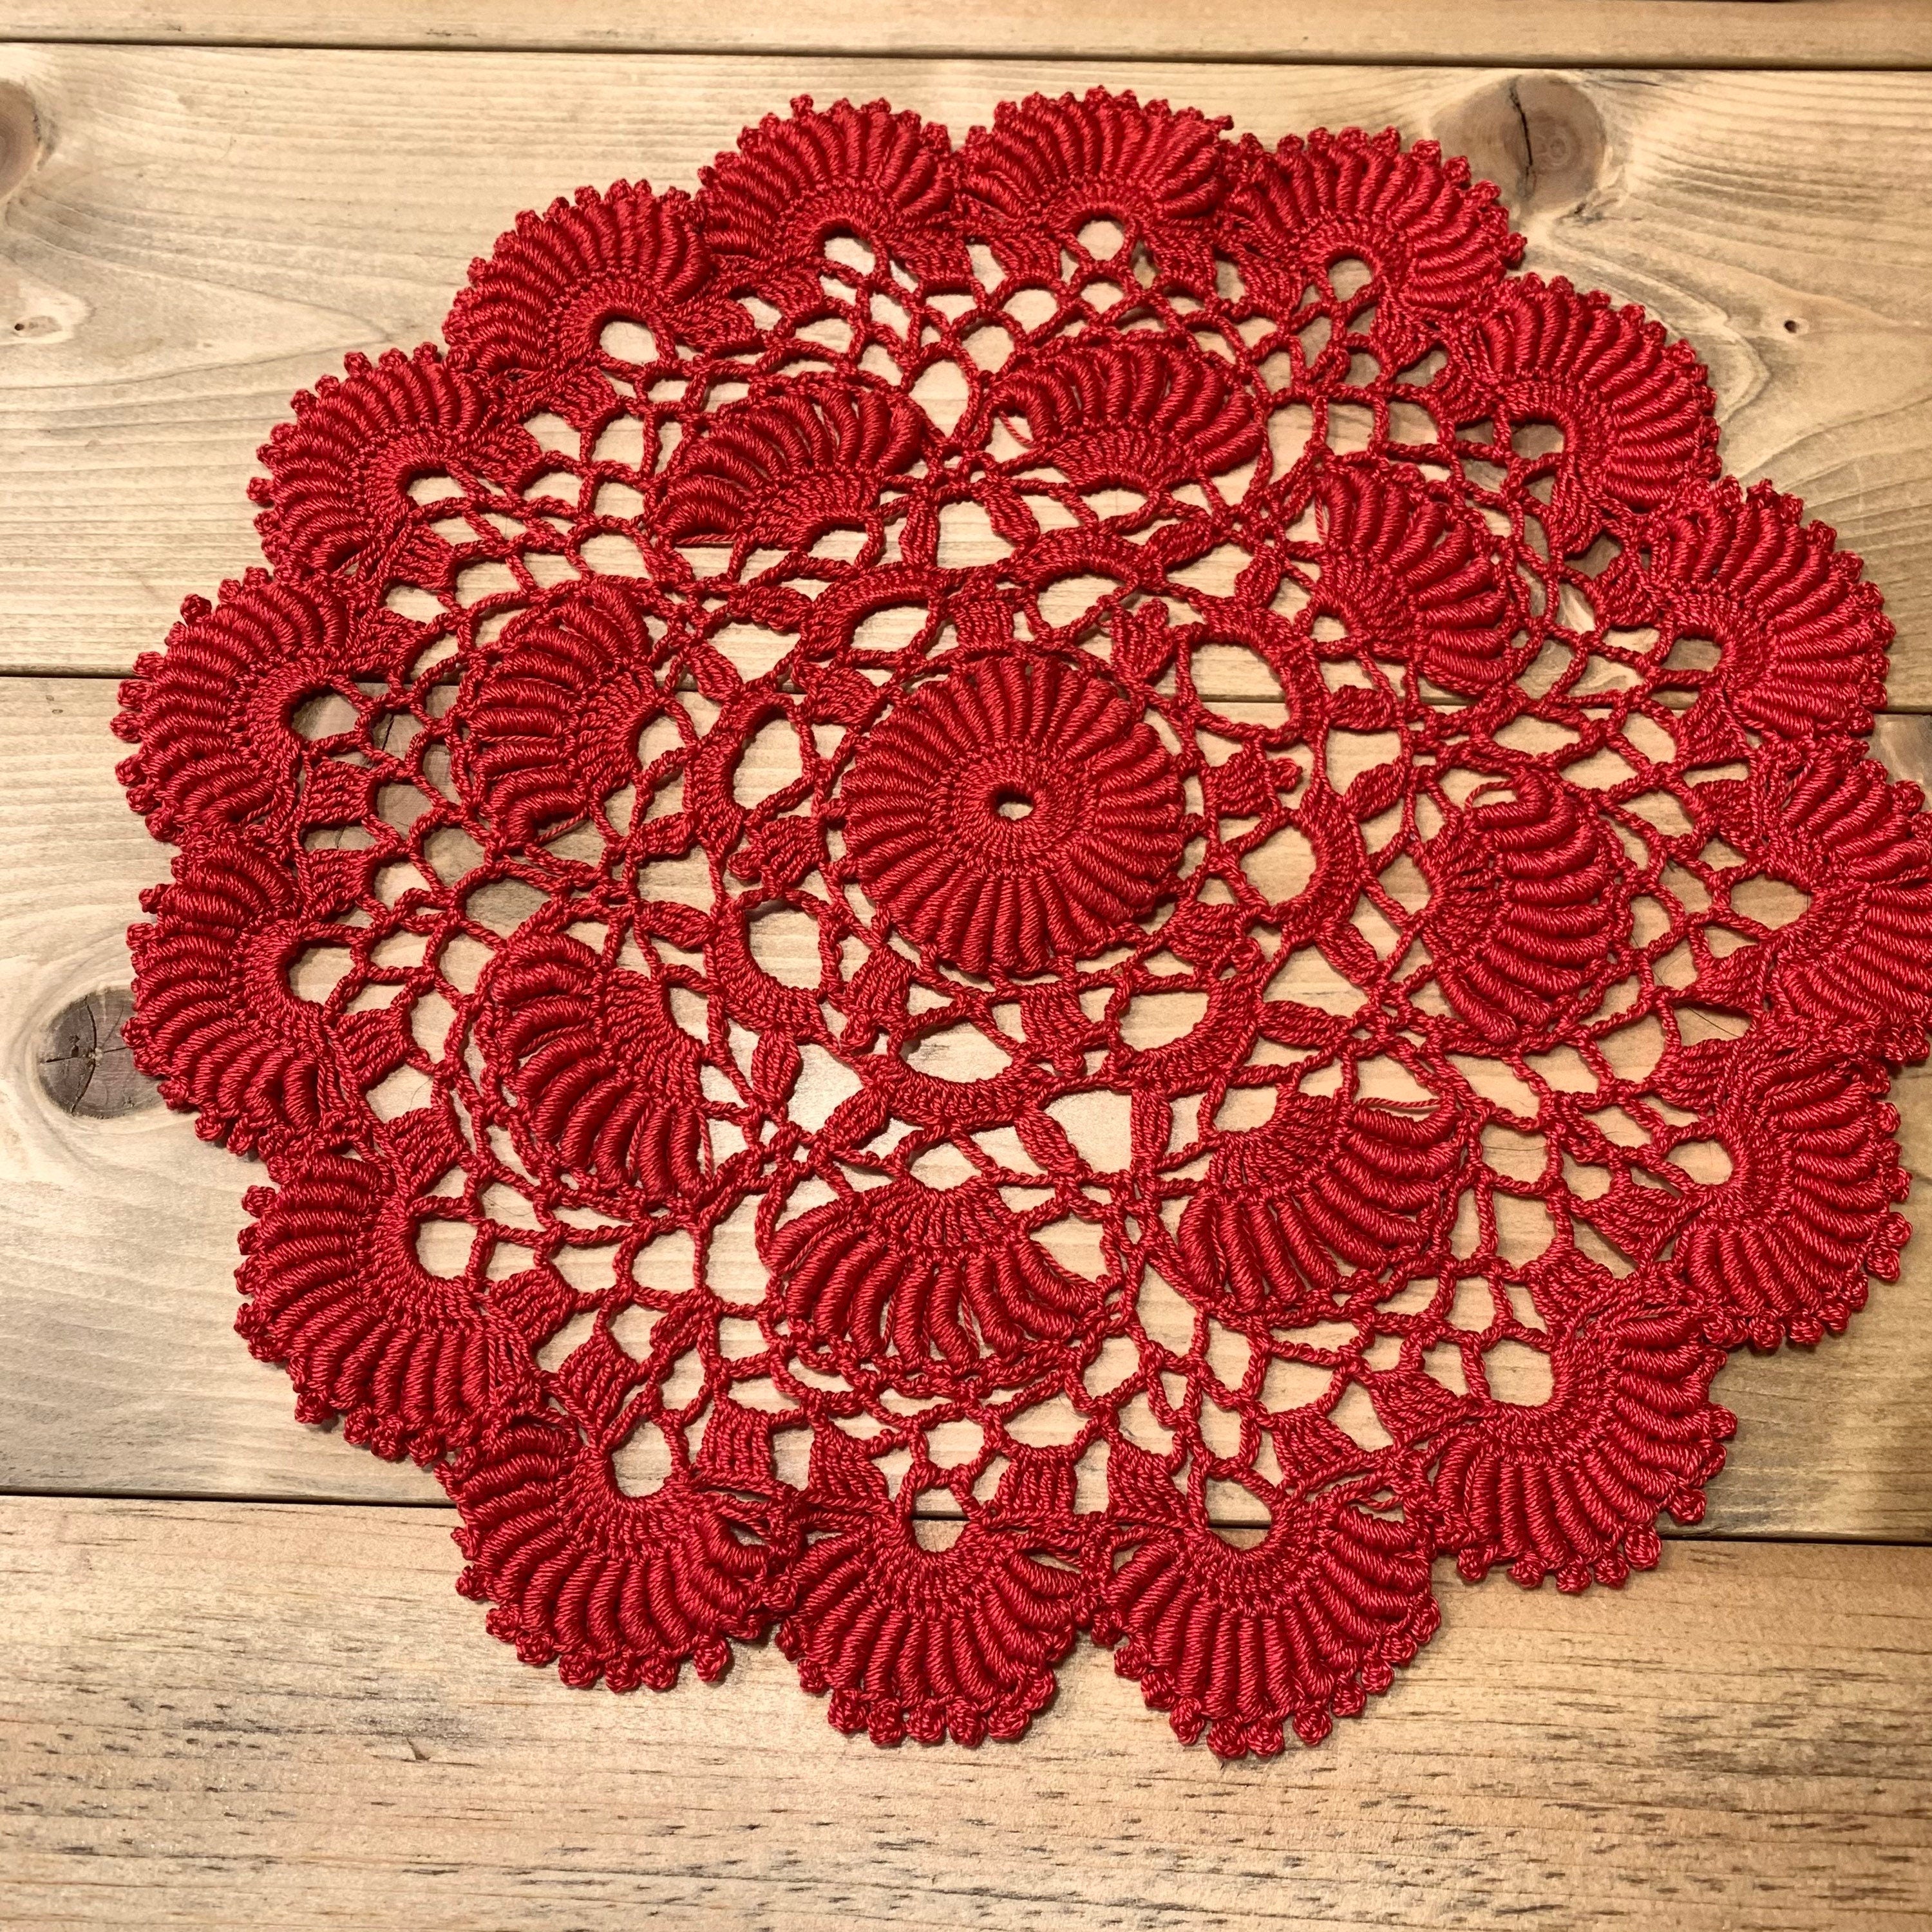 12” bright red doily